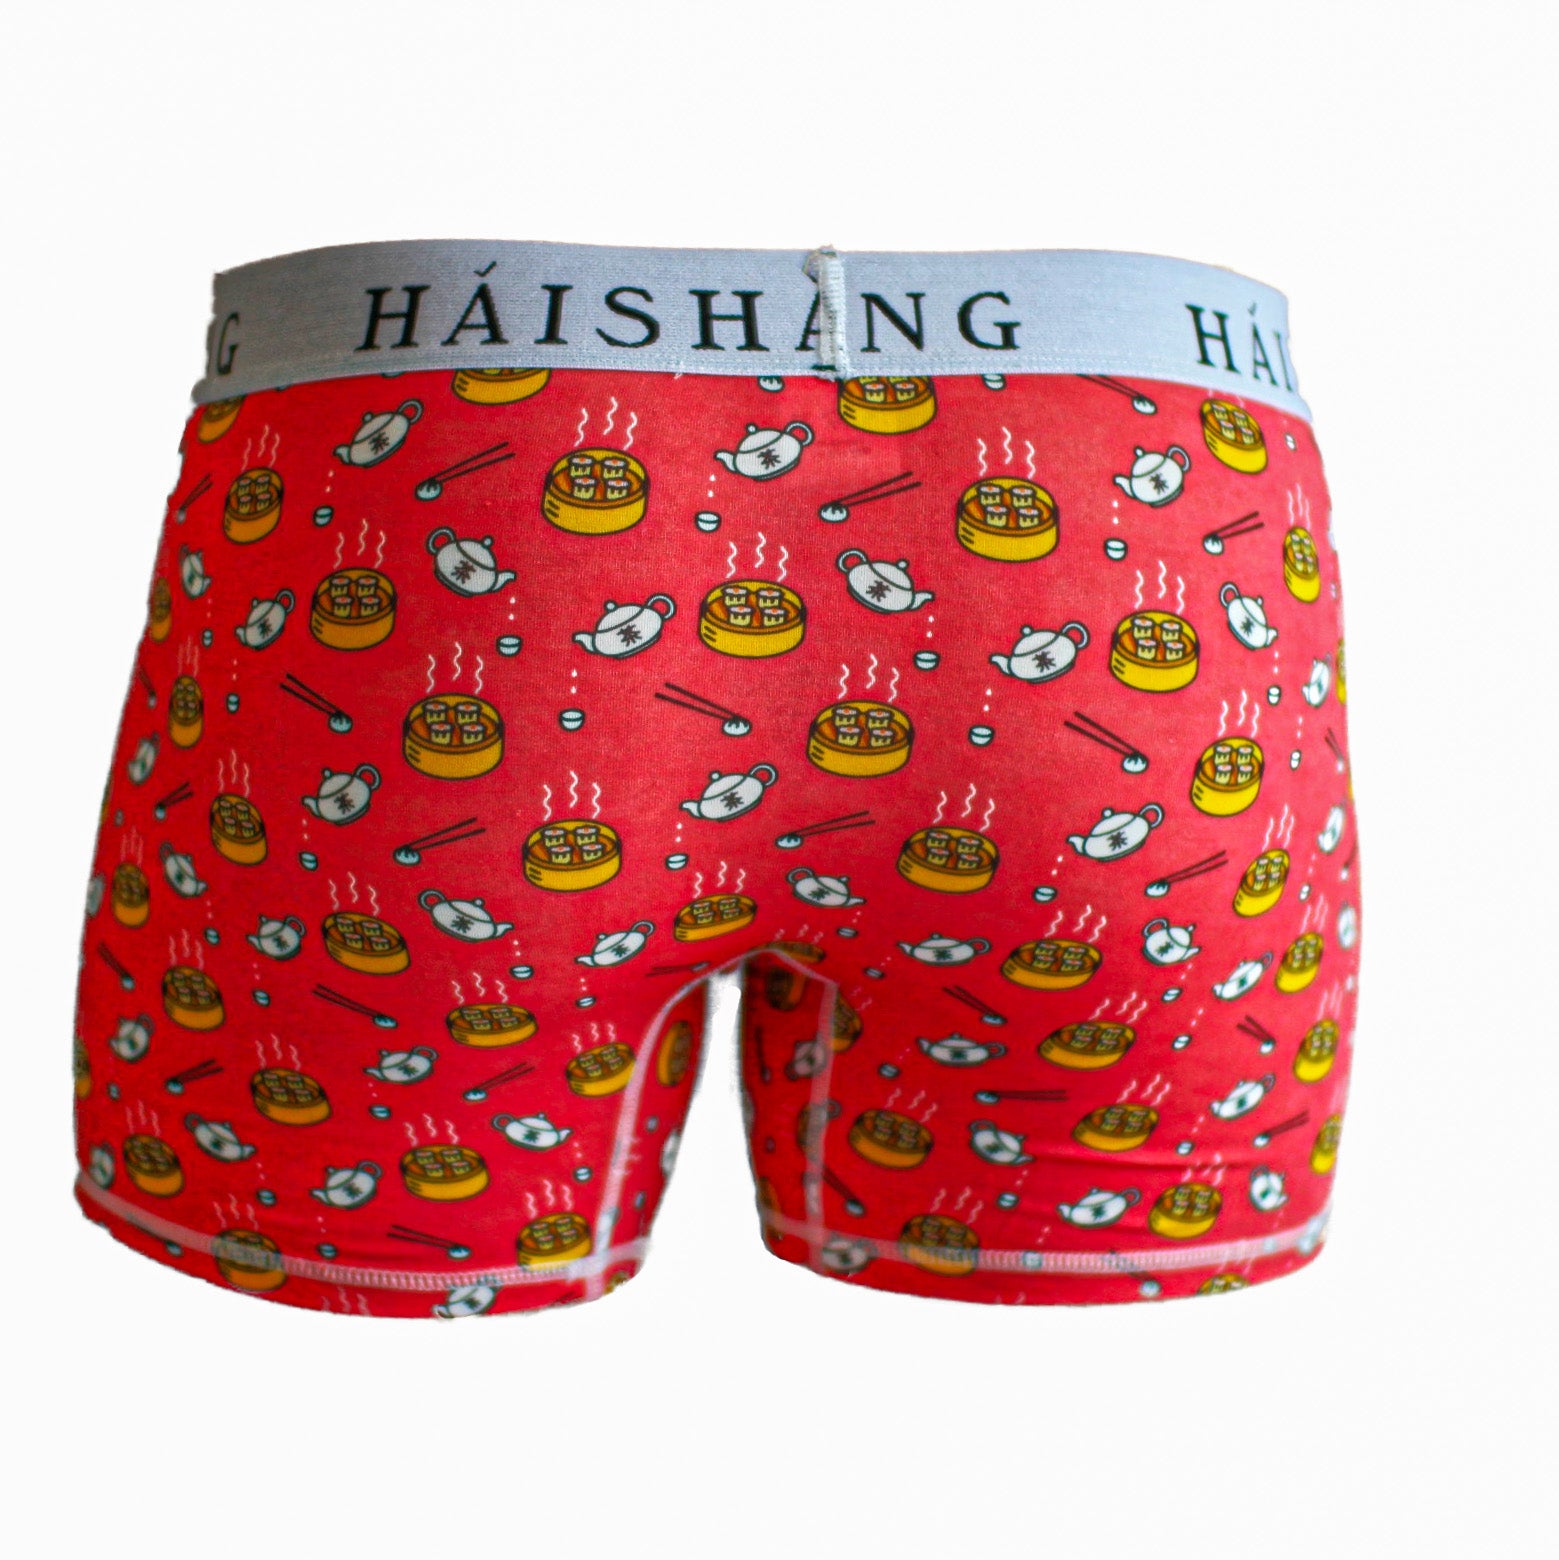 Suns Out Buns Out (Boxers) – Haishang